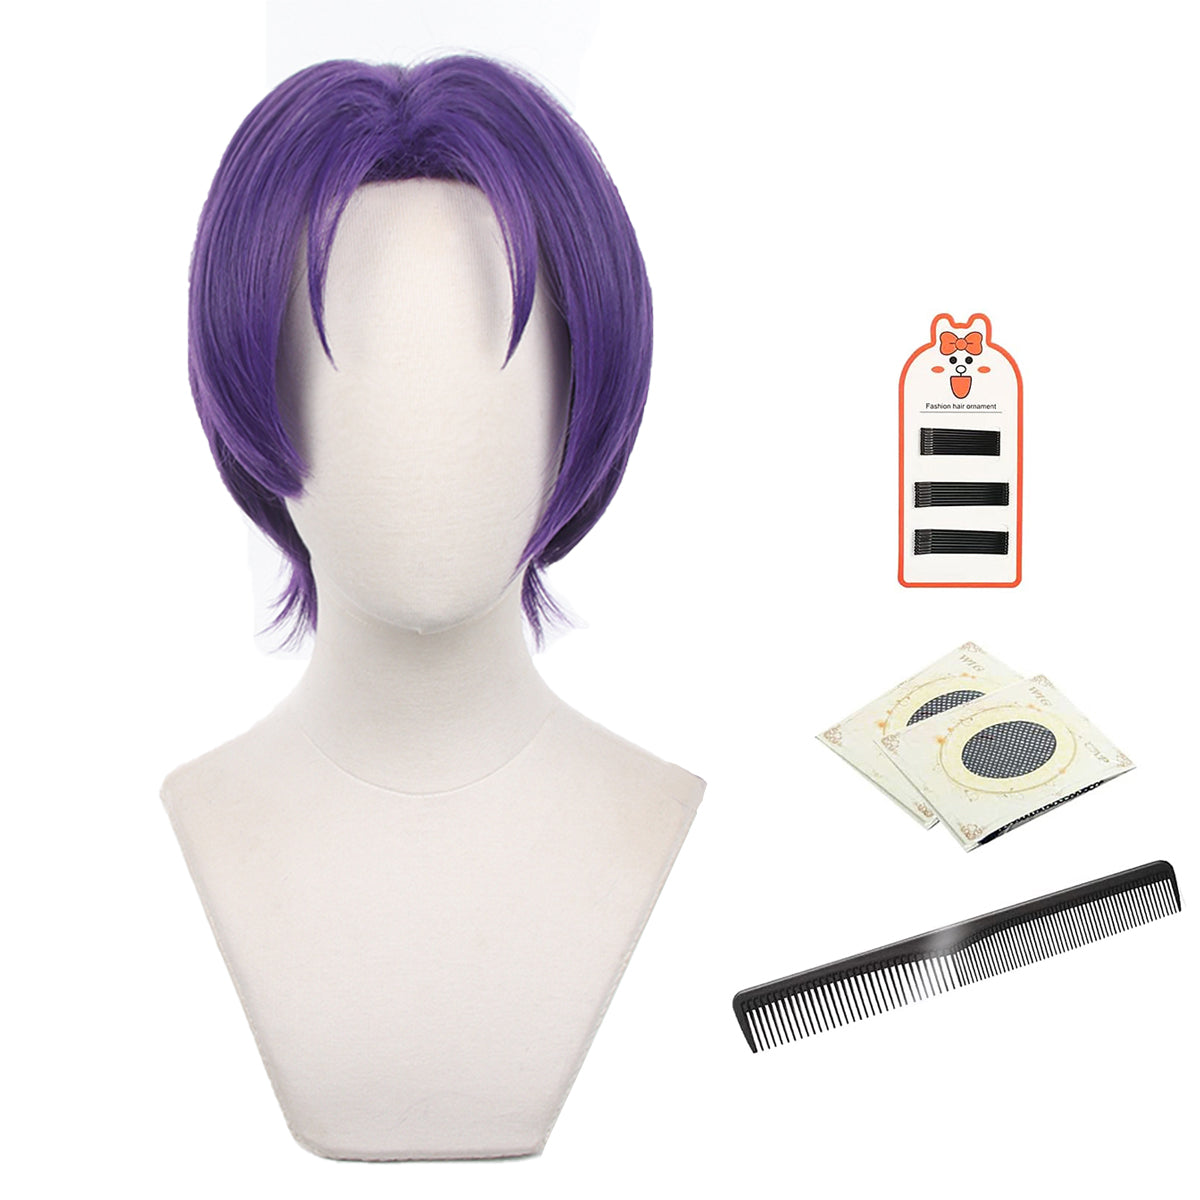 HOLOUN Blue Lock Manga Anime Cosplay Wig Reo Rose Net Synthetic Adjustable Size Short Version Party Gift